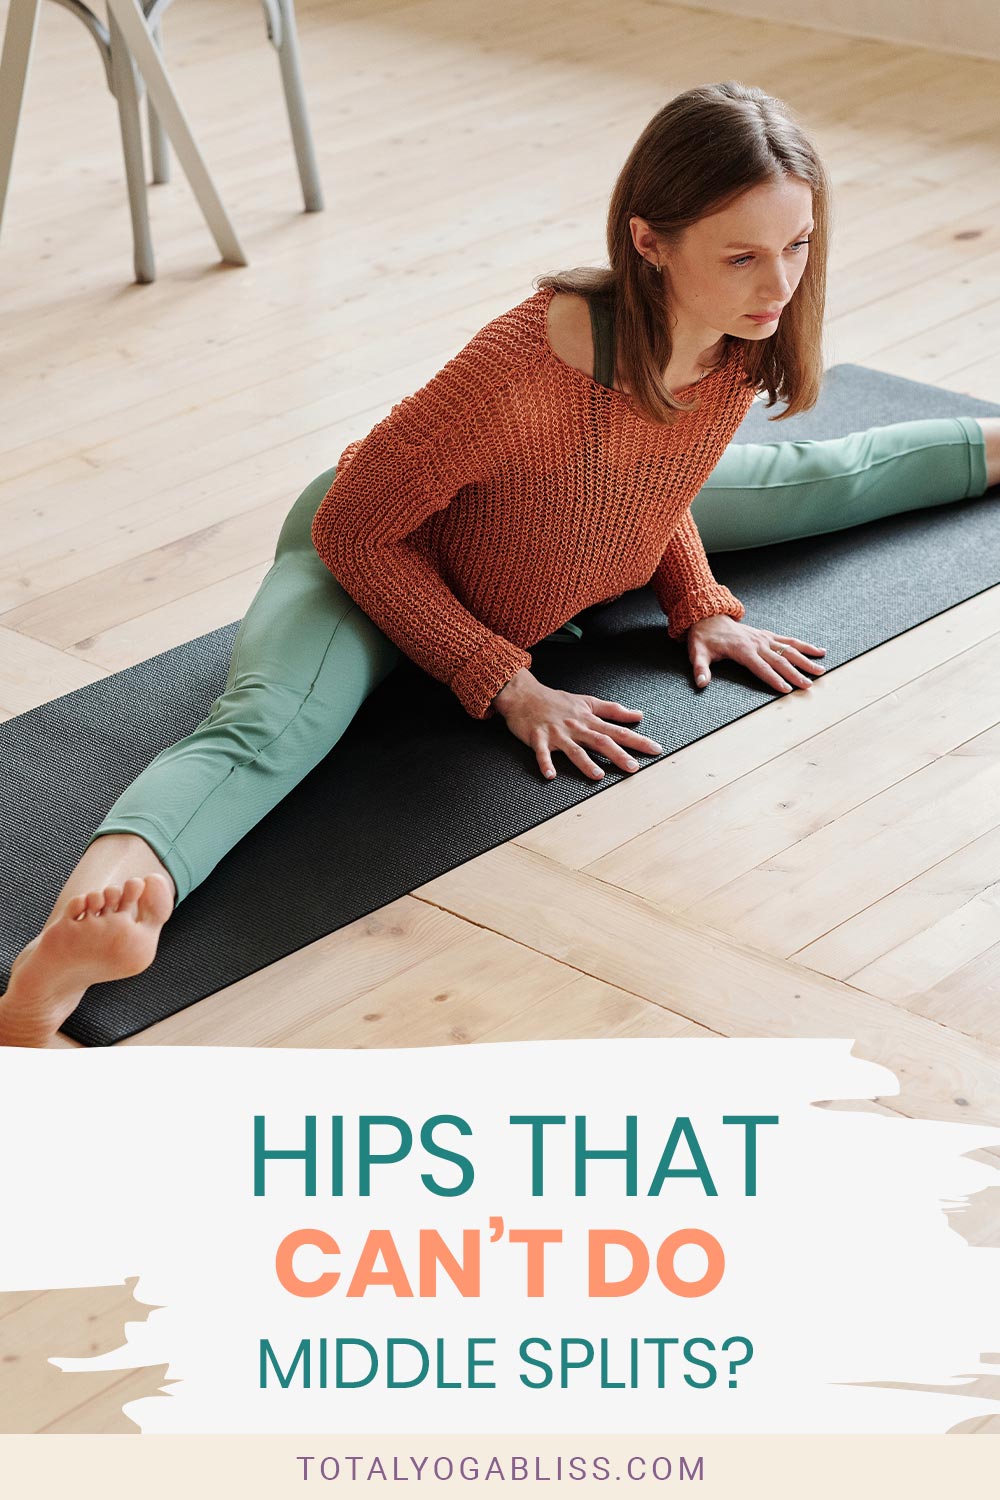 Woman in orange sweater doing a split - Hips That Can't Do Middle Splits?